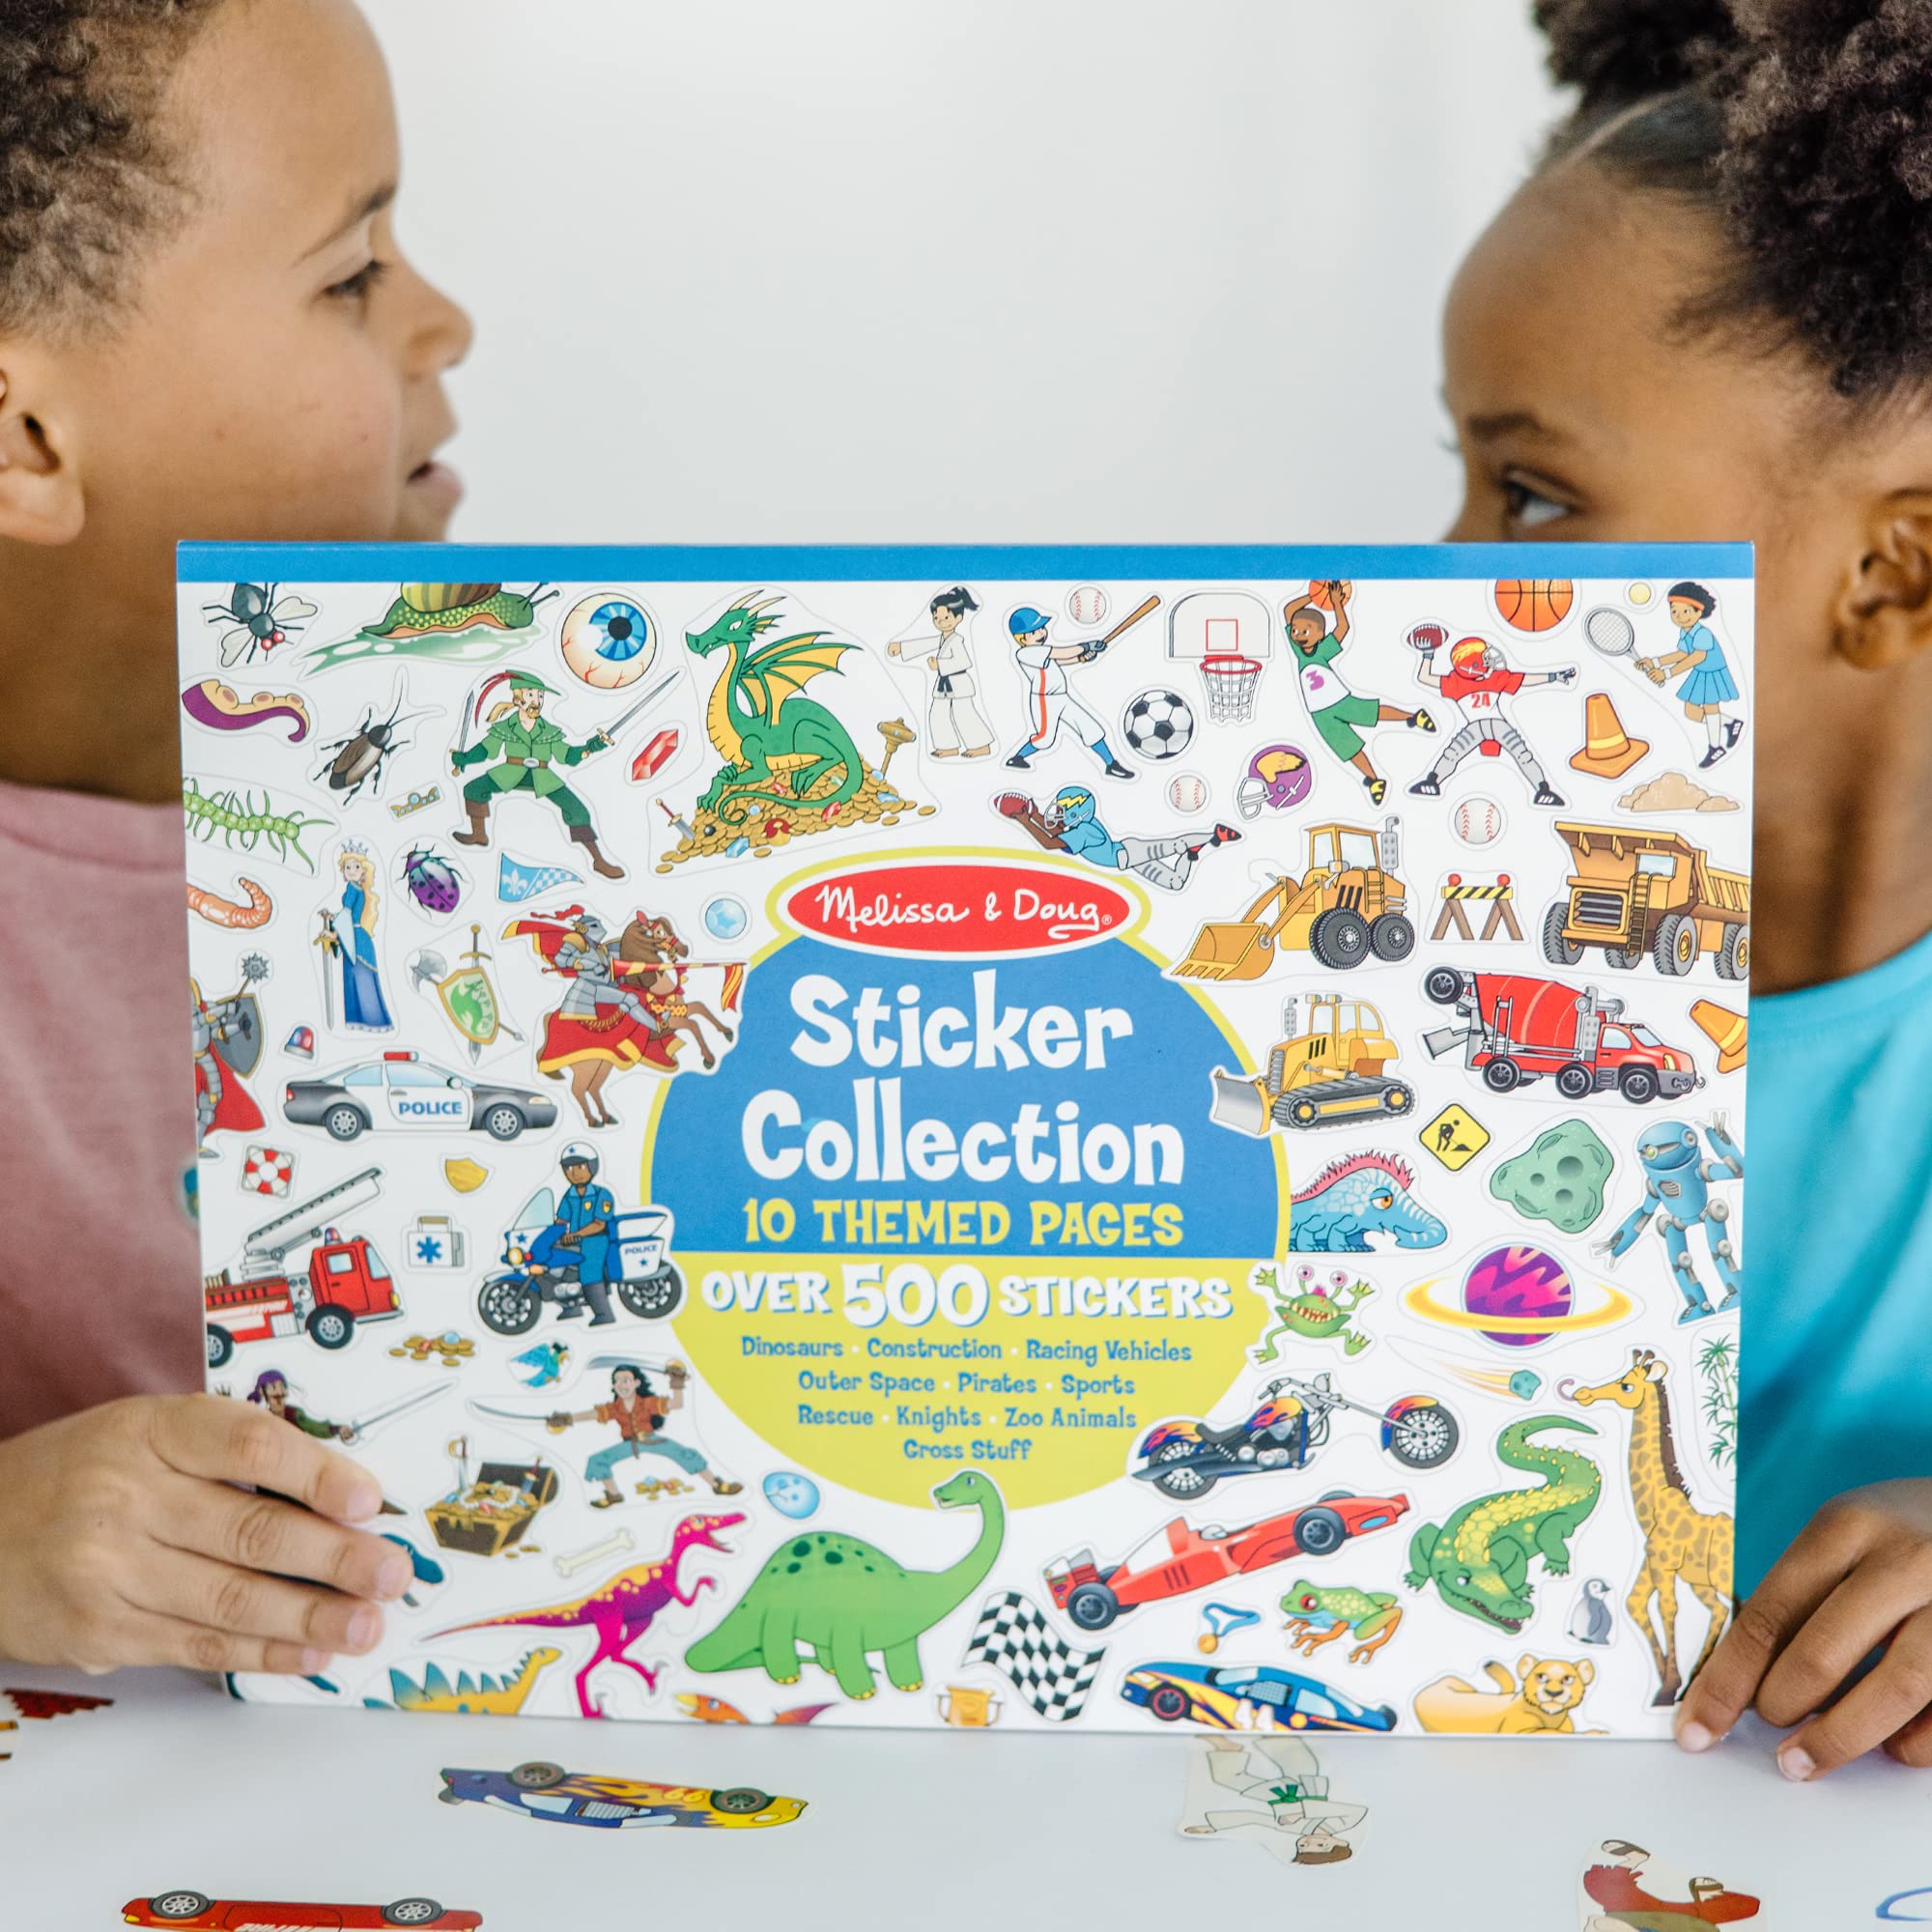 Melissa & Doug Sticker Collection Book: Dinosaurs, Vehicles, Space, and More - 500+ Stickers - Sticker Books, Arts And Crafts Activity For Kids Ages 3+